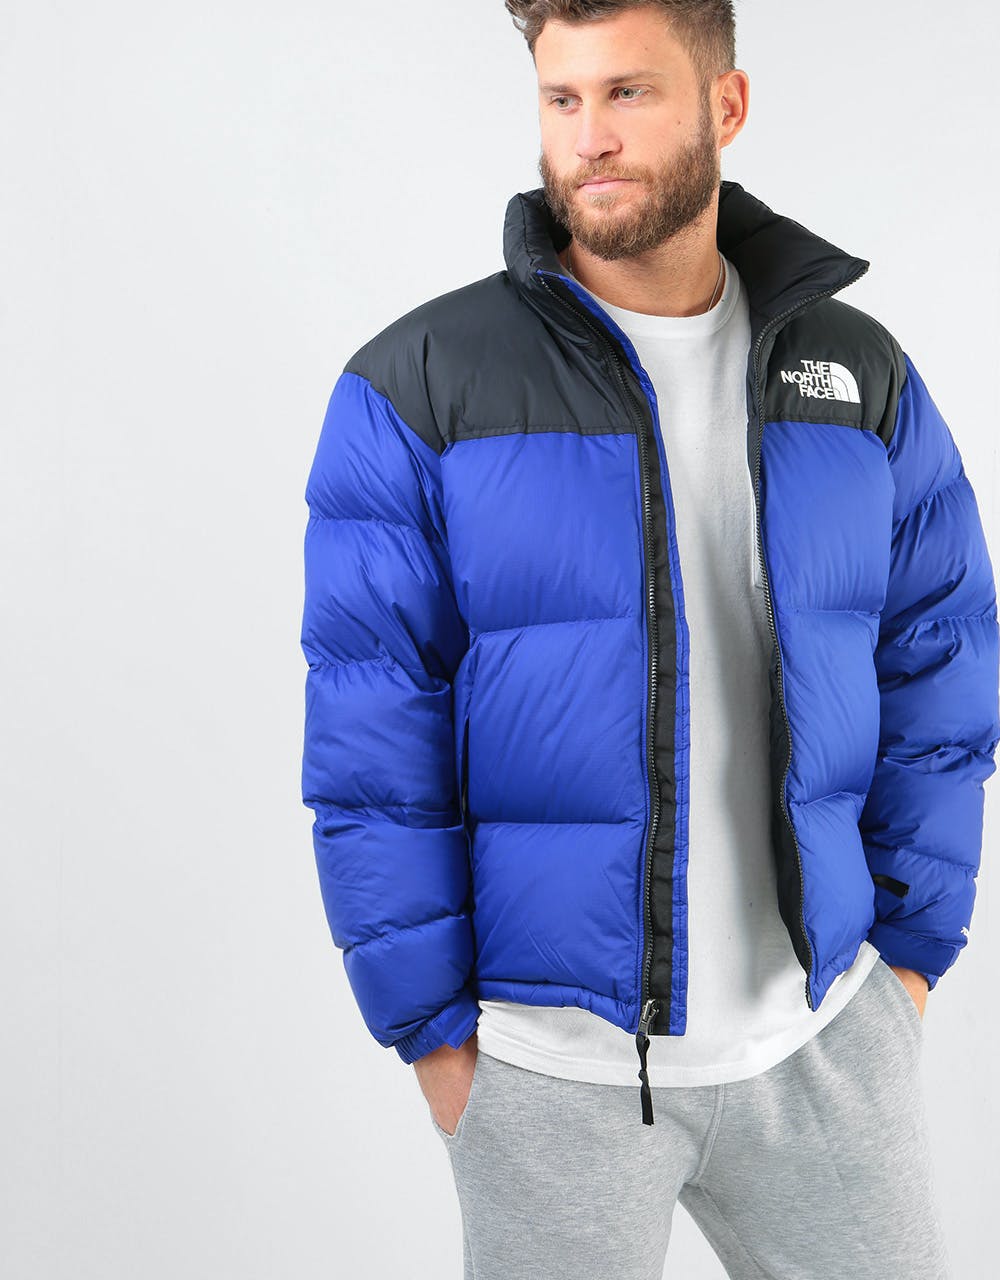 north face puffer jacket blue